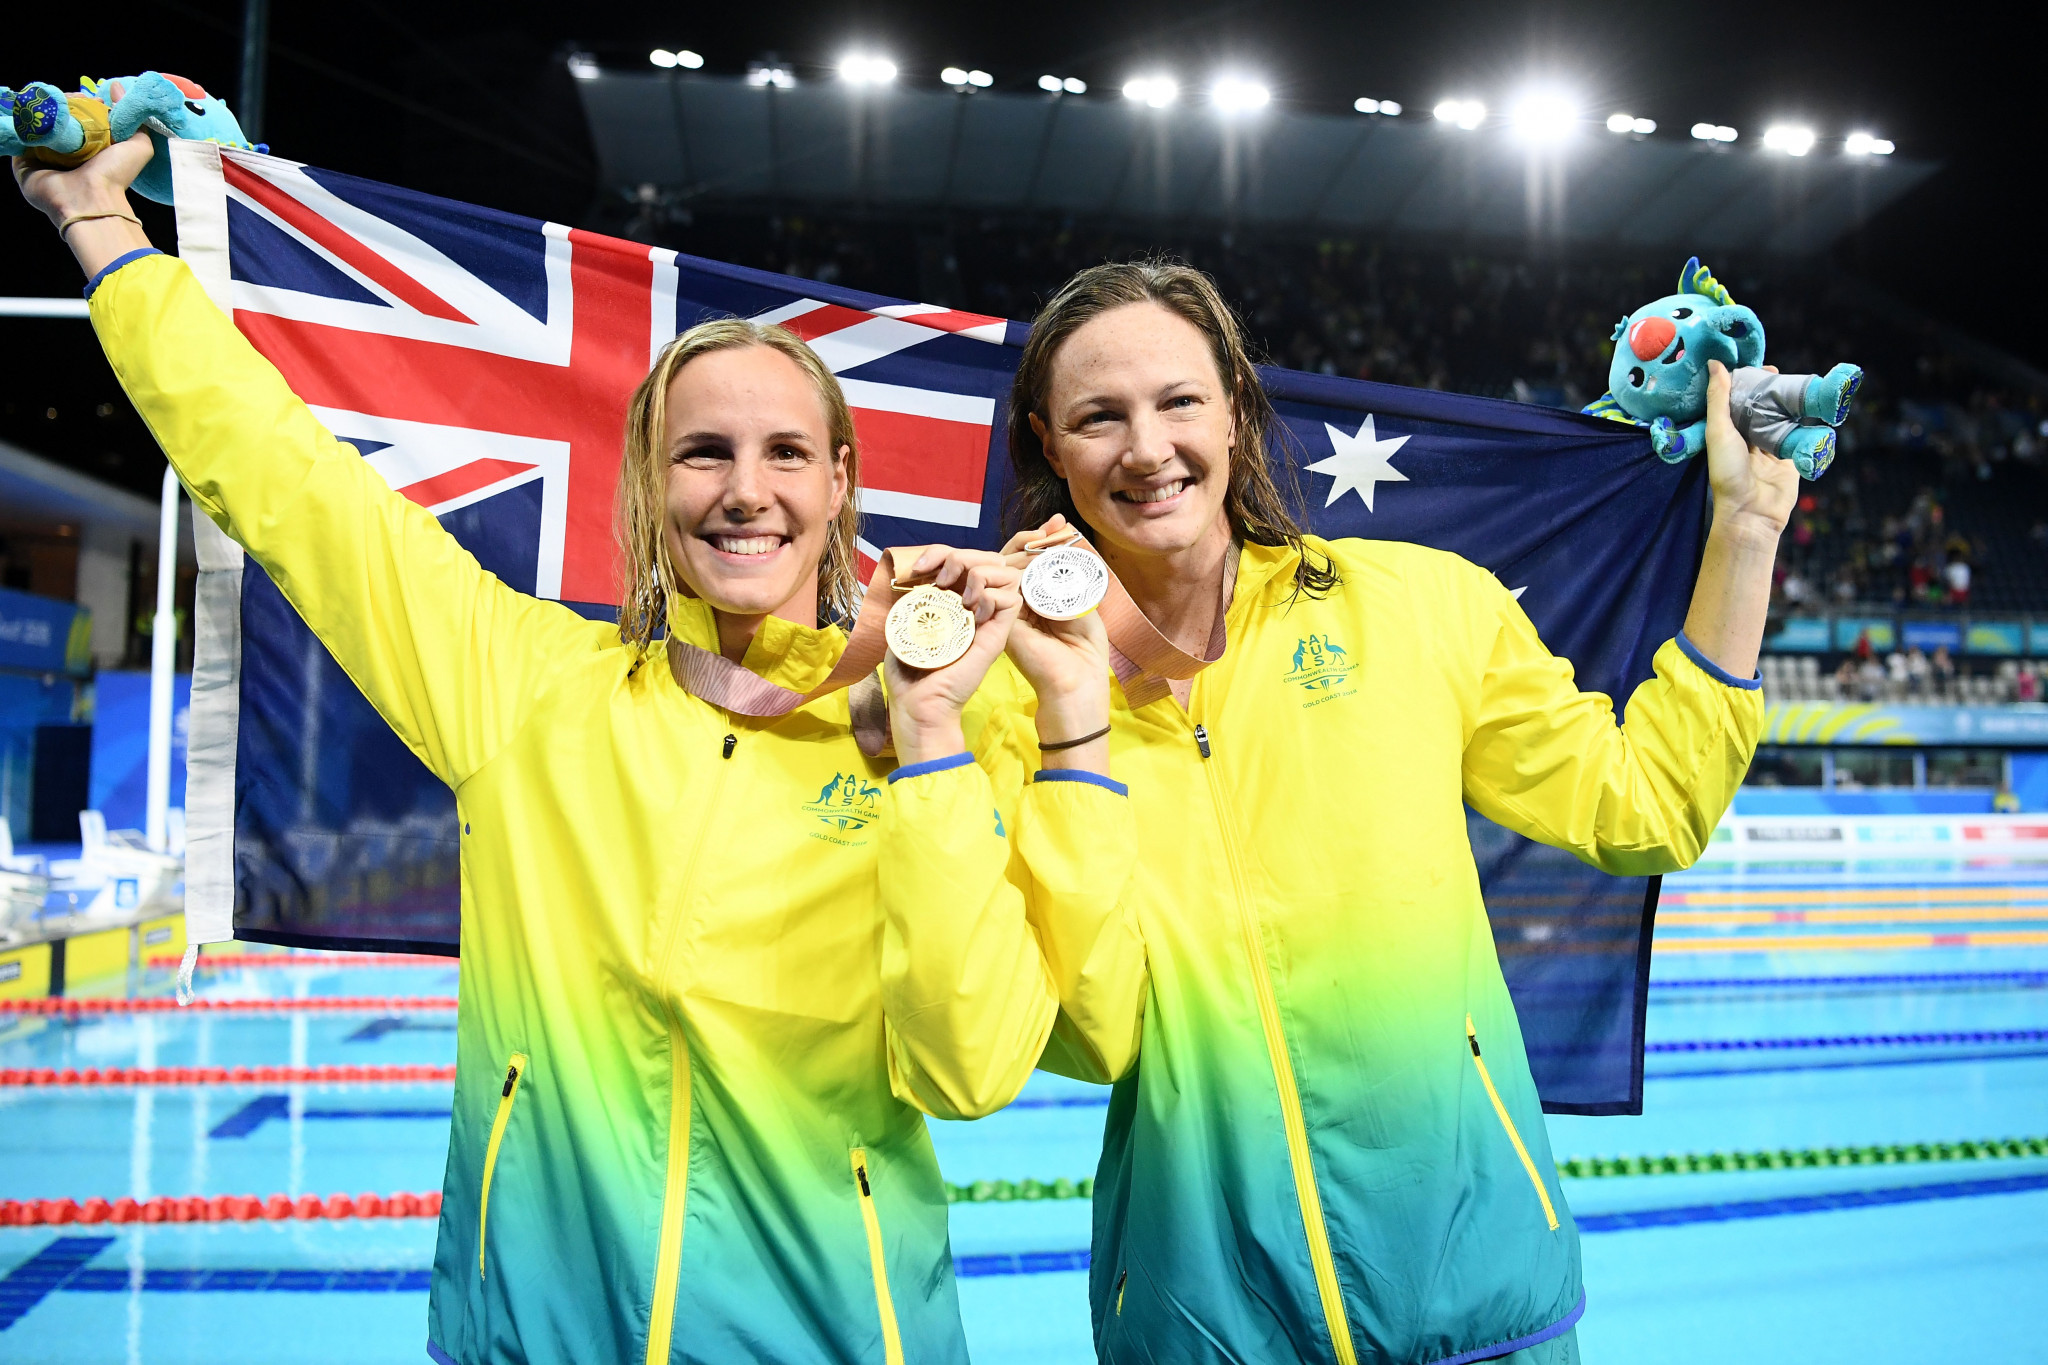 Bronte beats sister Cate as Van der Burgh stuns Peaty on thrilling night of swimming at Gold Coast 2018